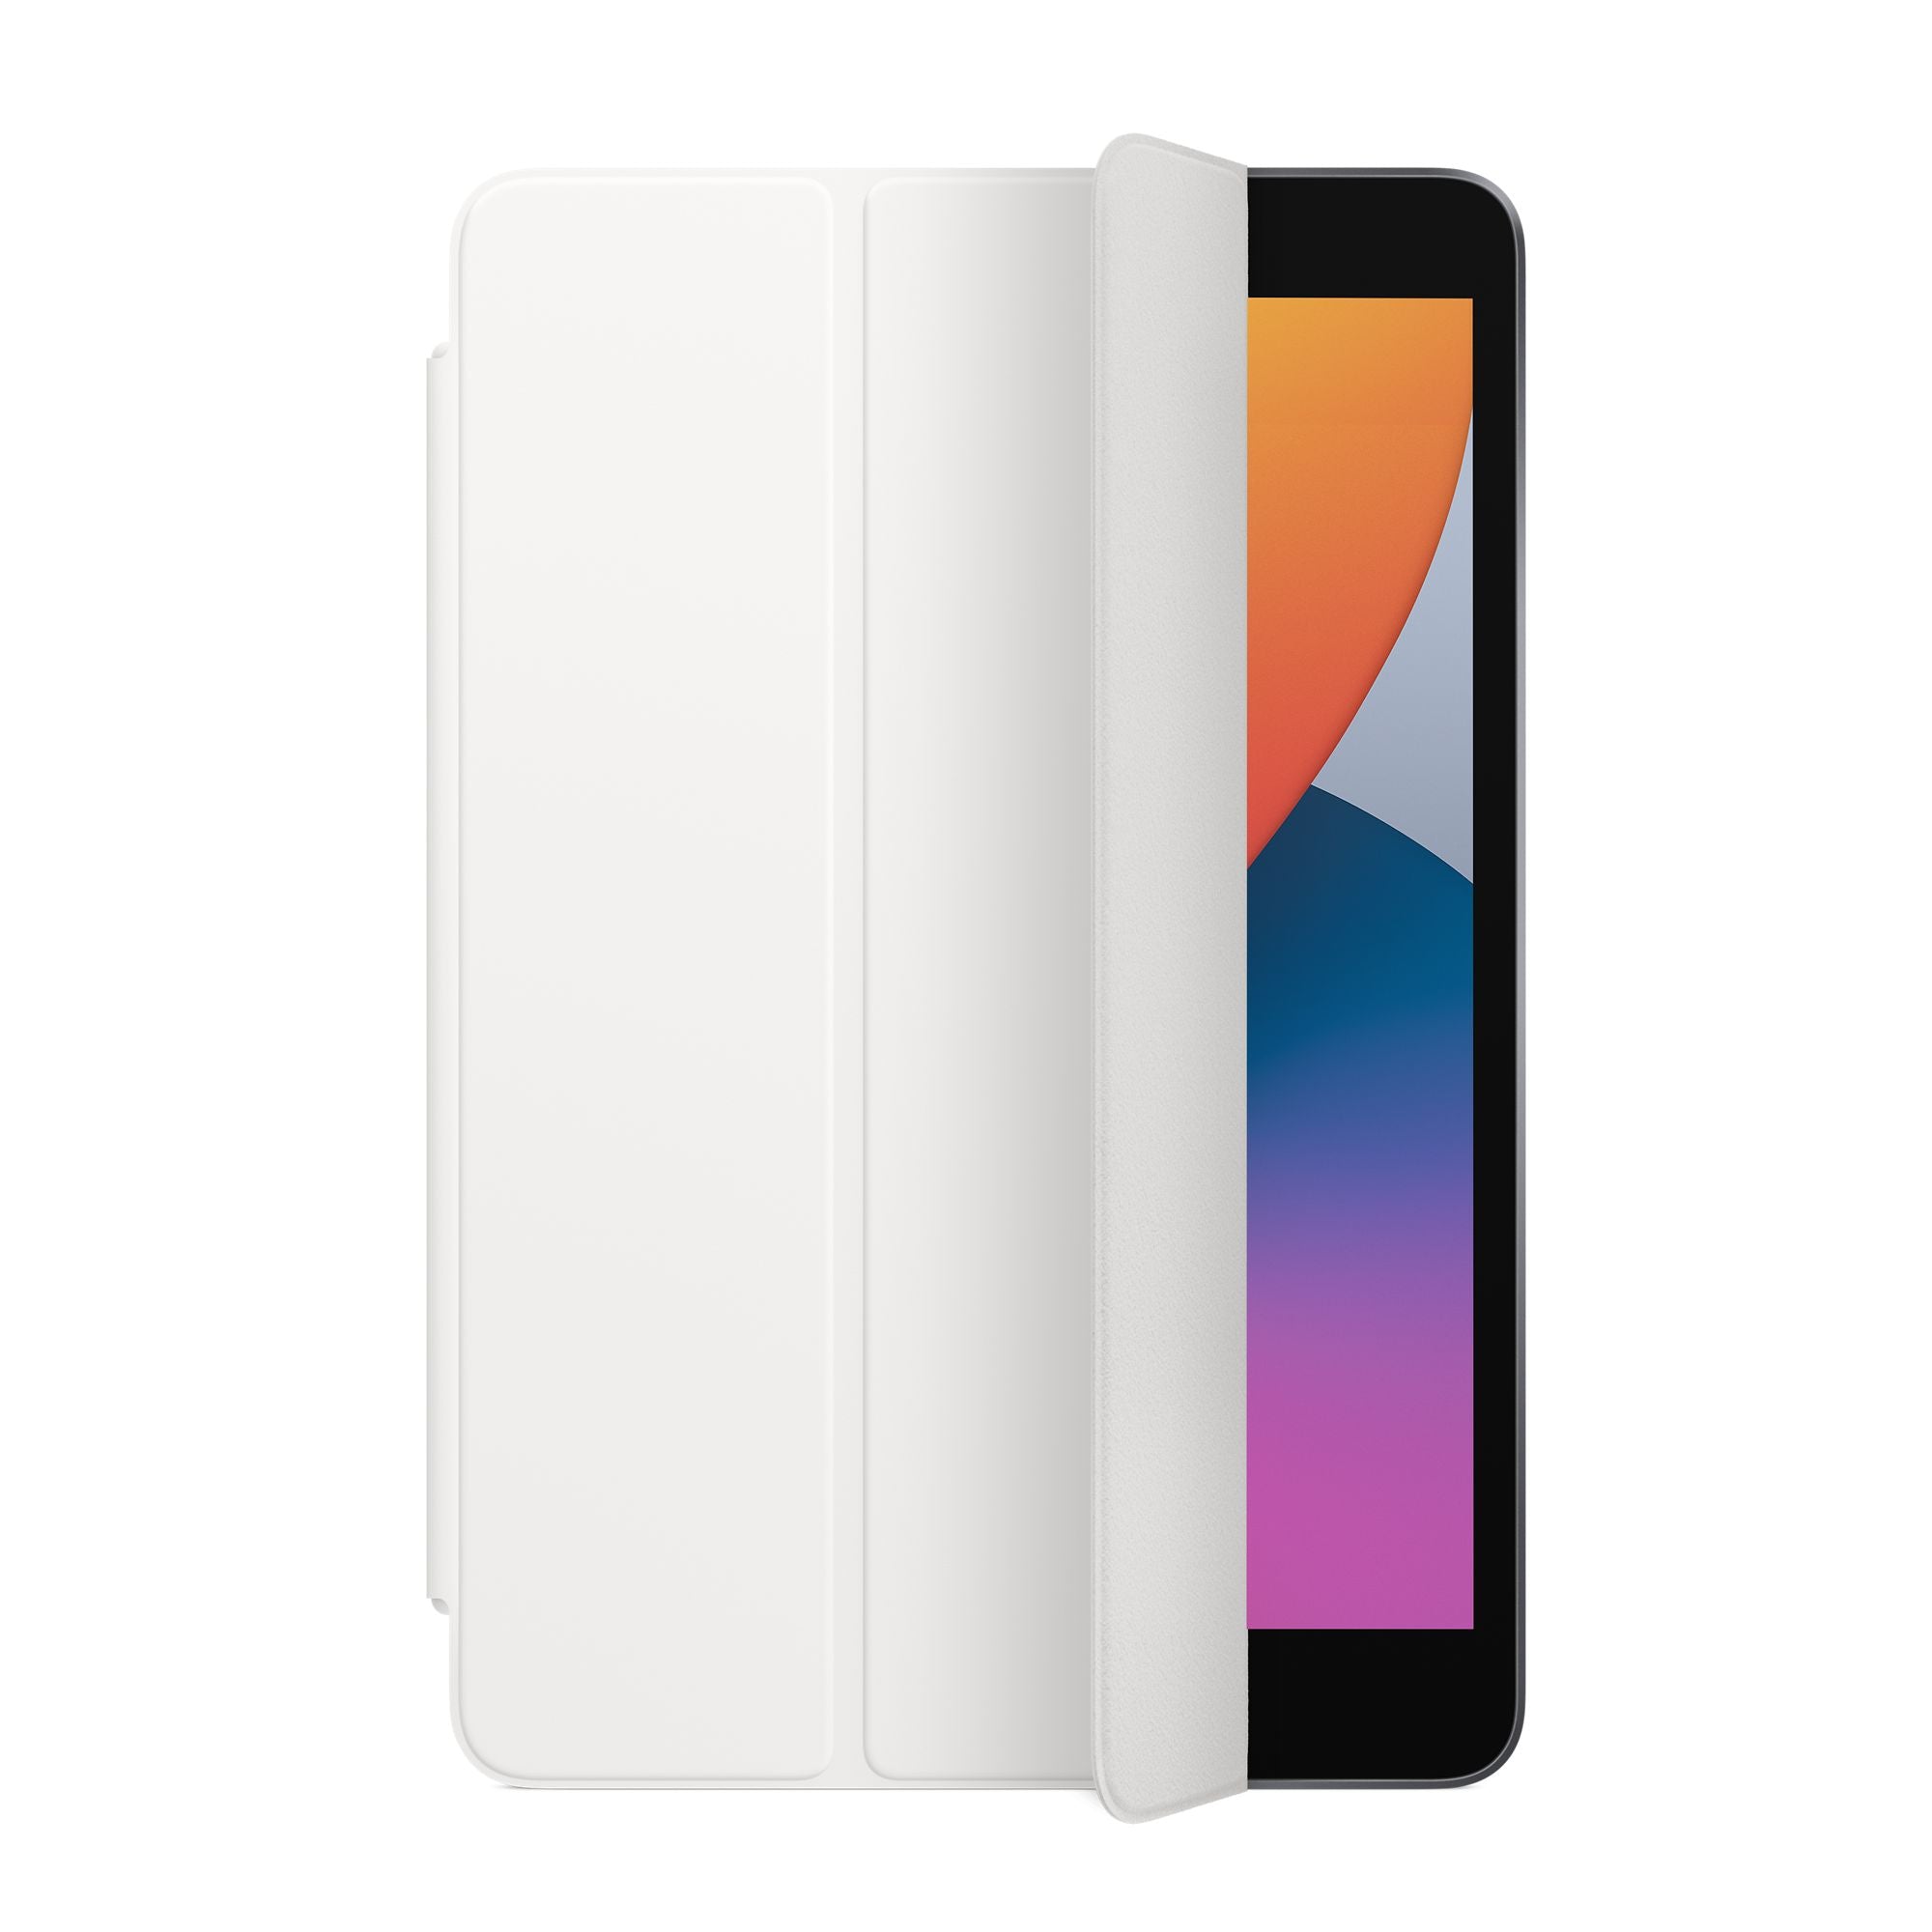 Smart Cover for iPad (8th Generation)